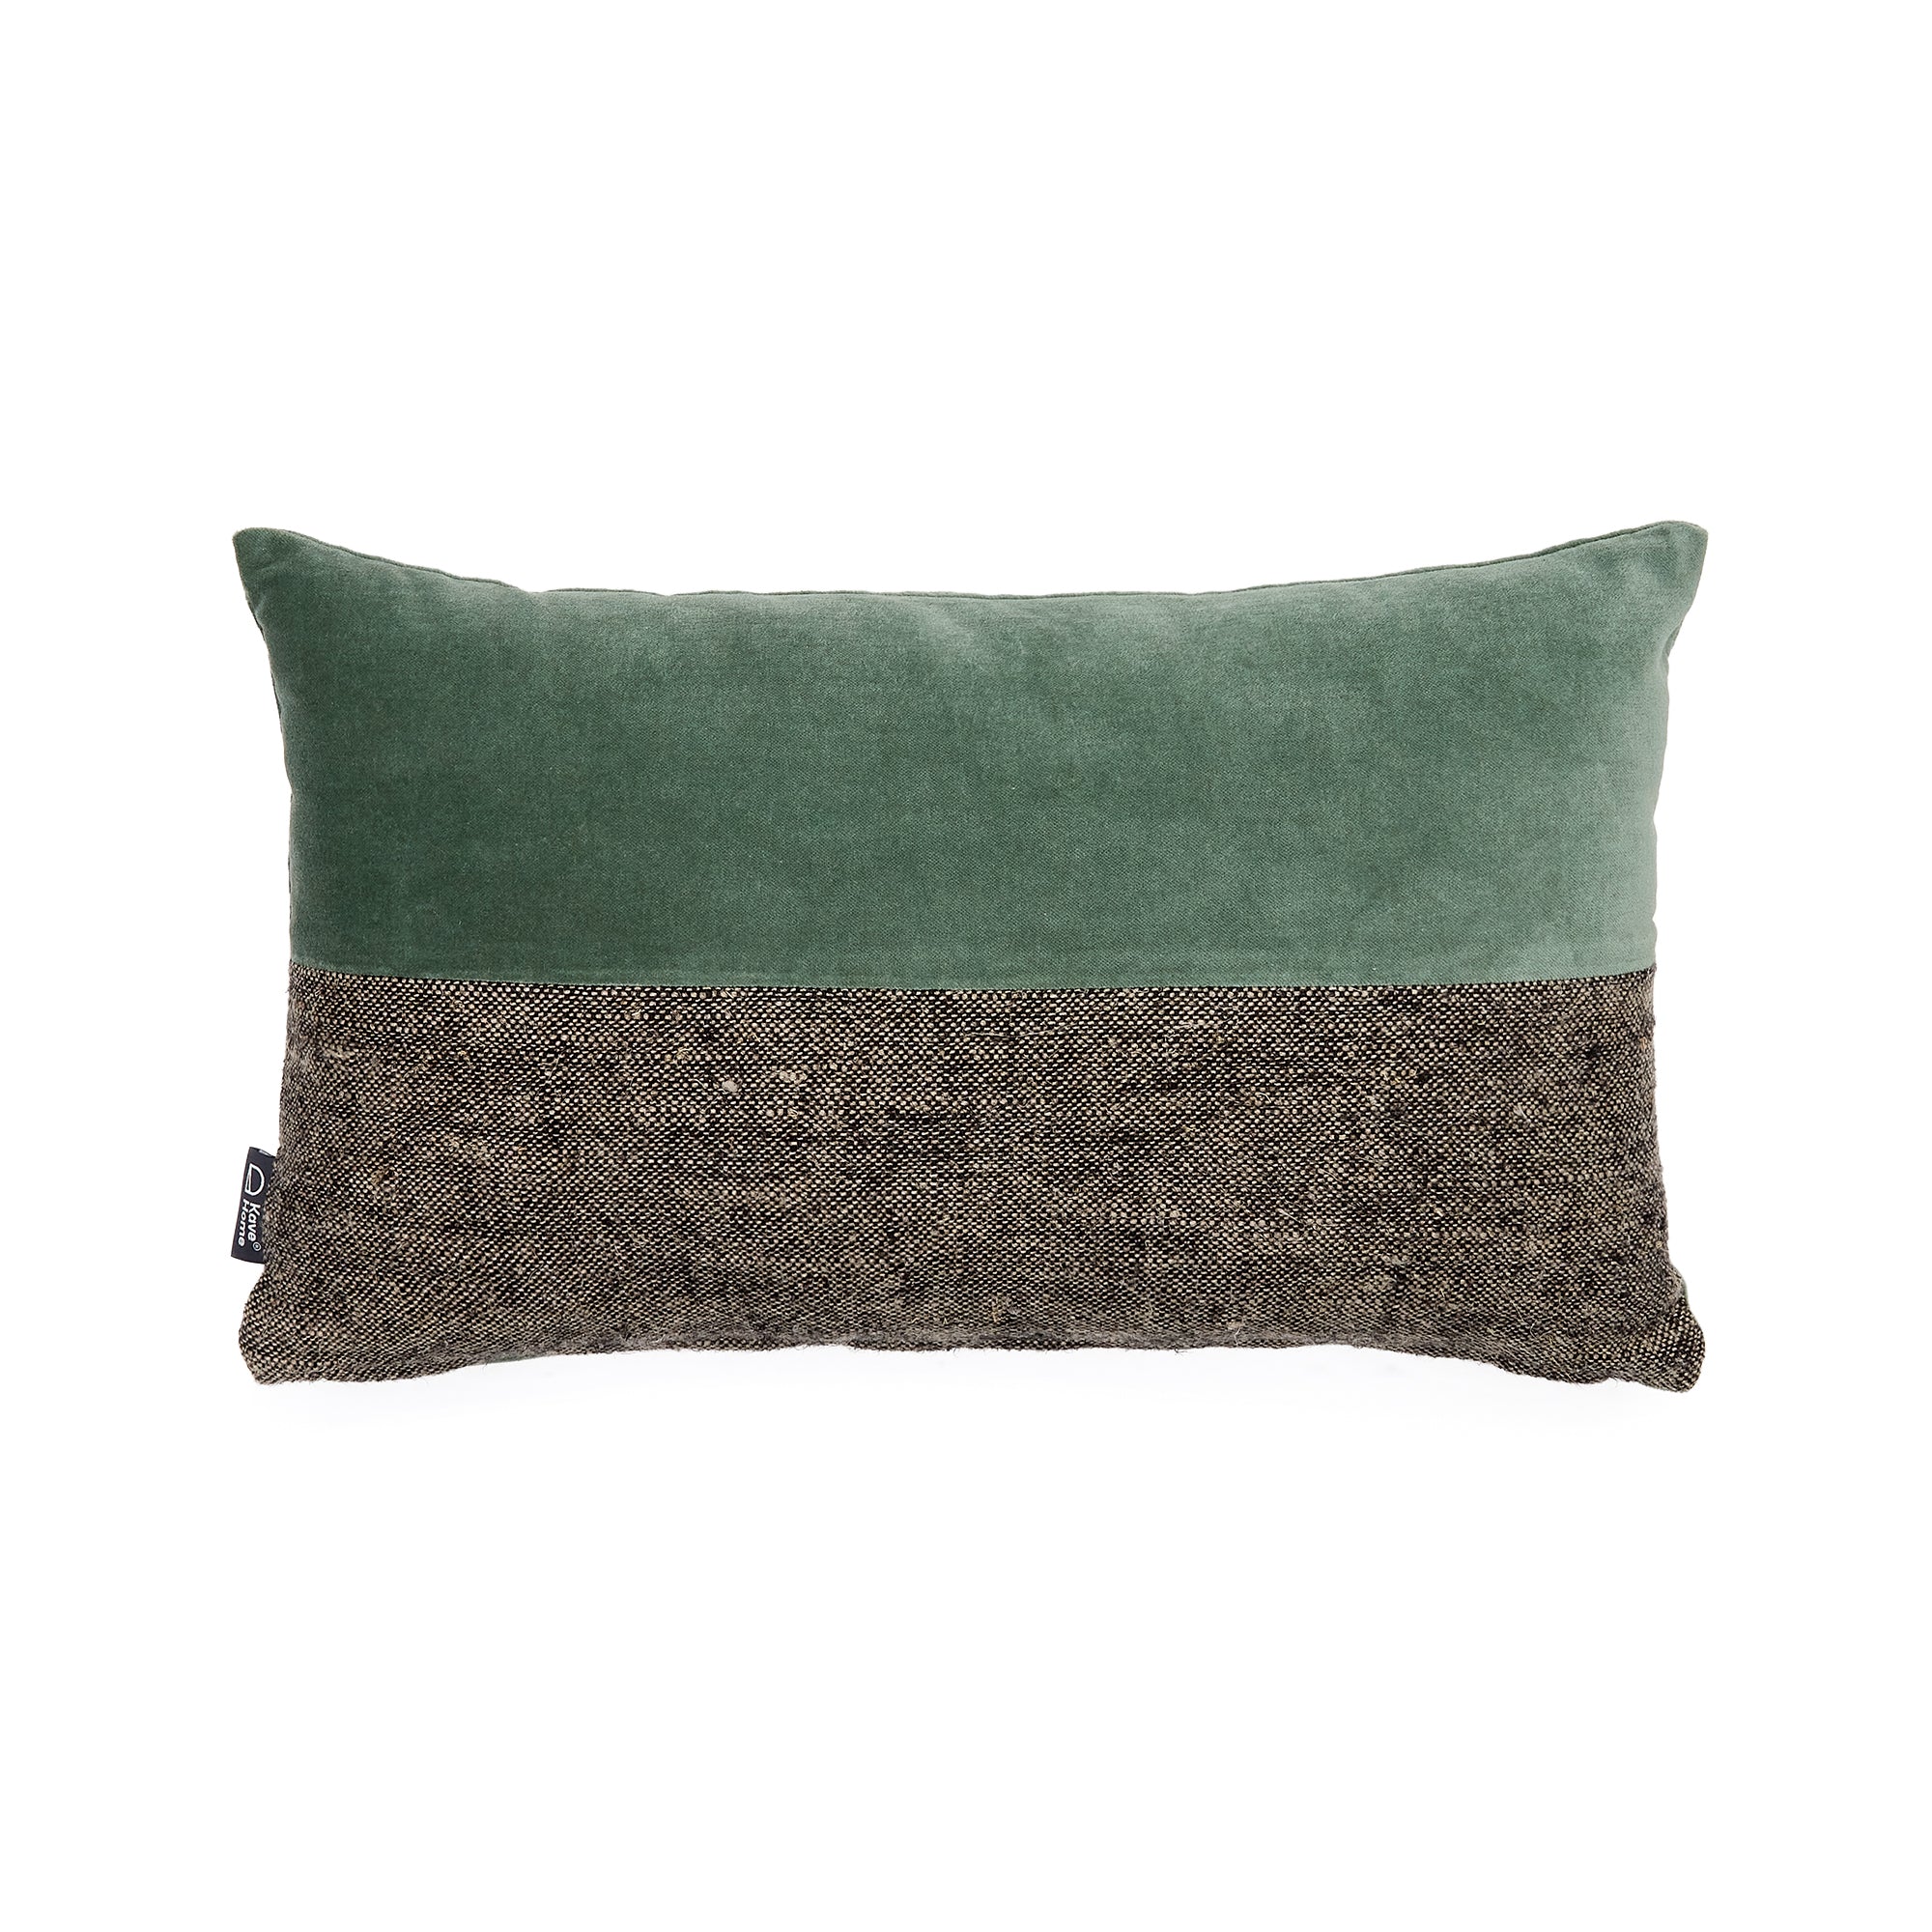 Mikayla linen and cotton printed cushion cover with black and green velvet 30 x 50cm